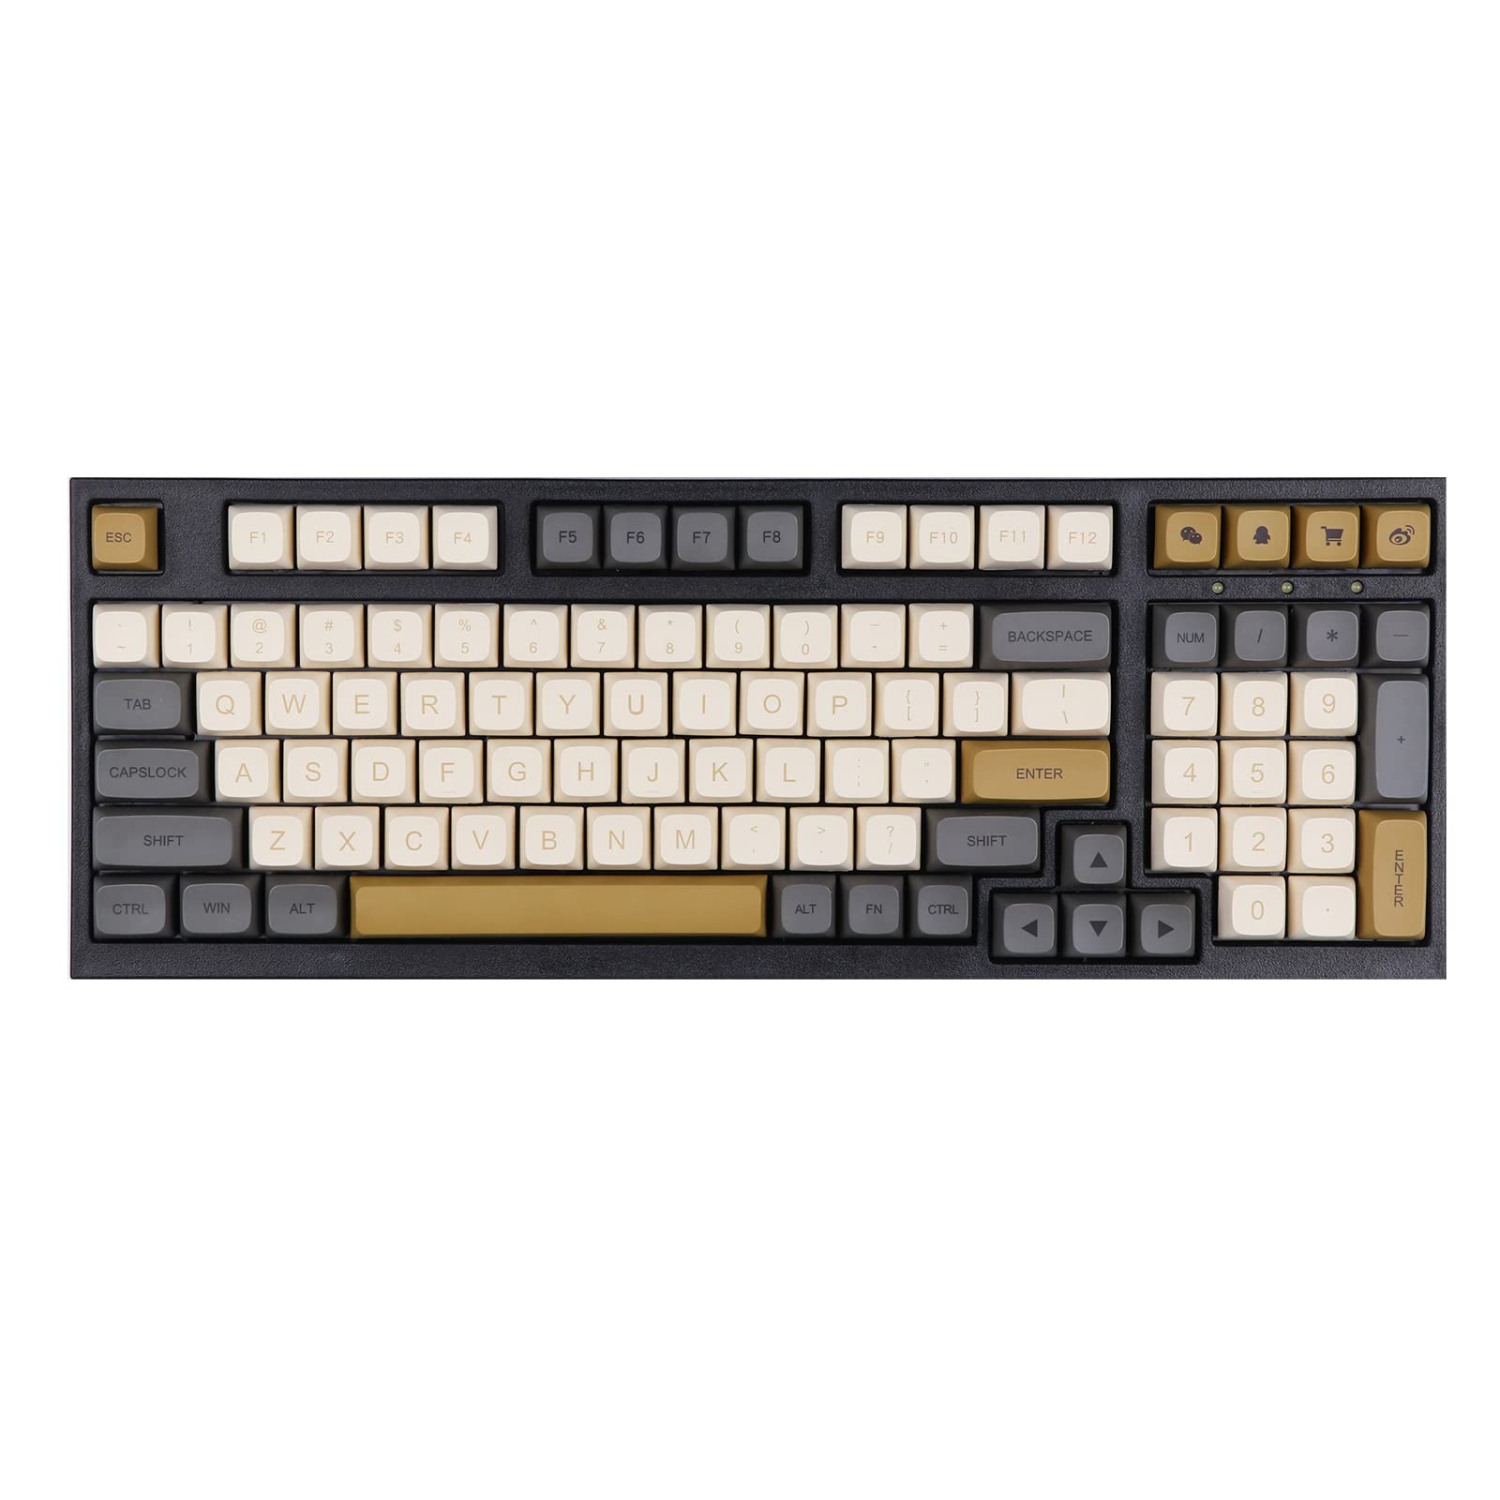 Dawn 138 Keys XDA Profile Dye Sublimation PBT Keycaps Set for Mechanical Gaming Keyboard, Compatible with Cherry/Gateron/Otemu/Kailh Switch (XDA Profile, Dawn Keycaps)